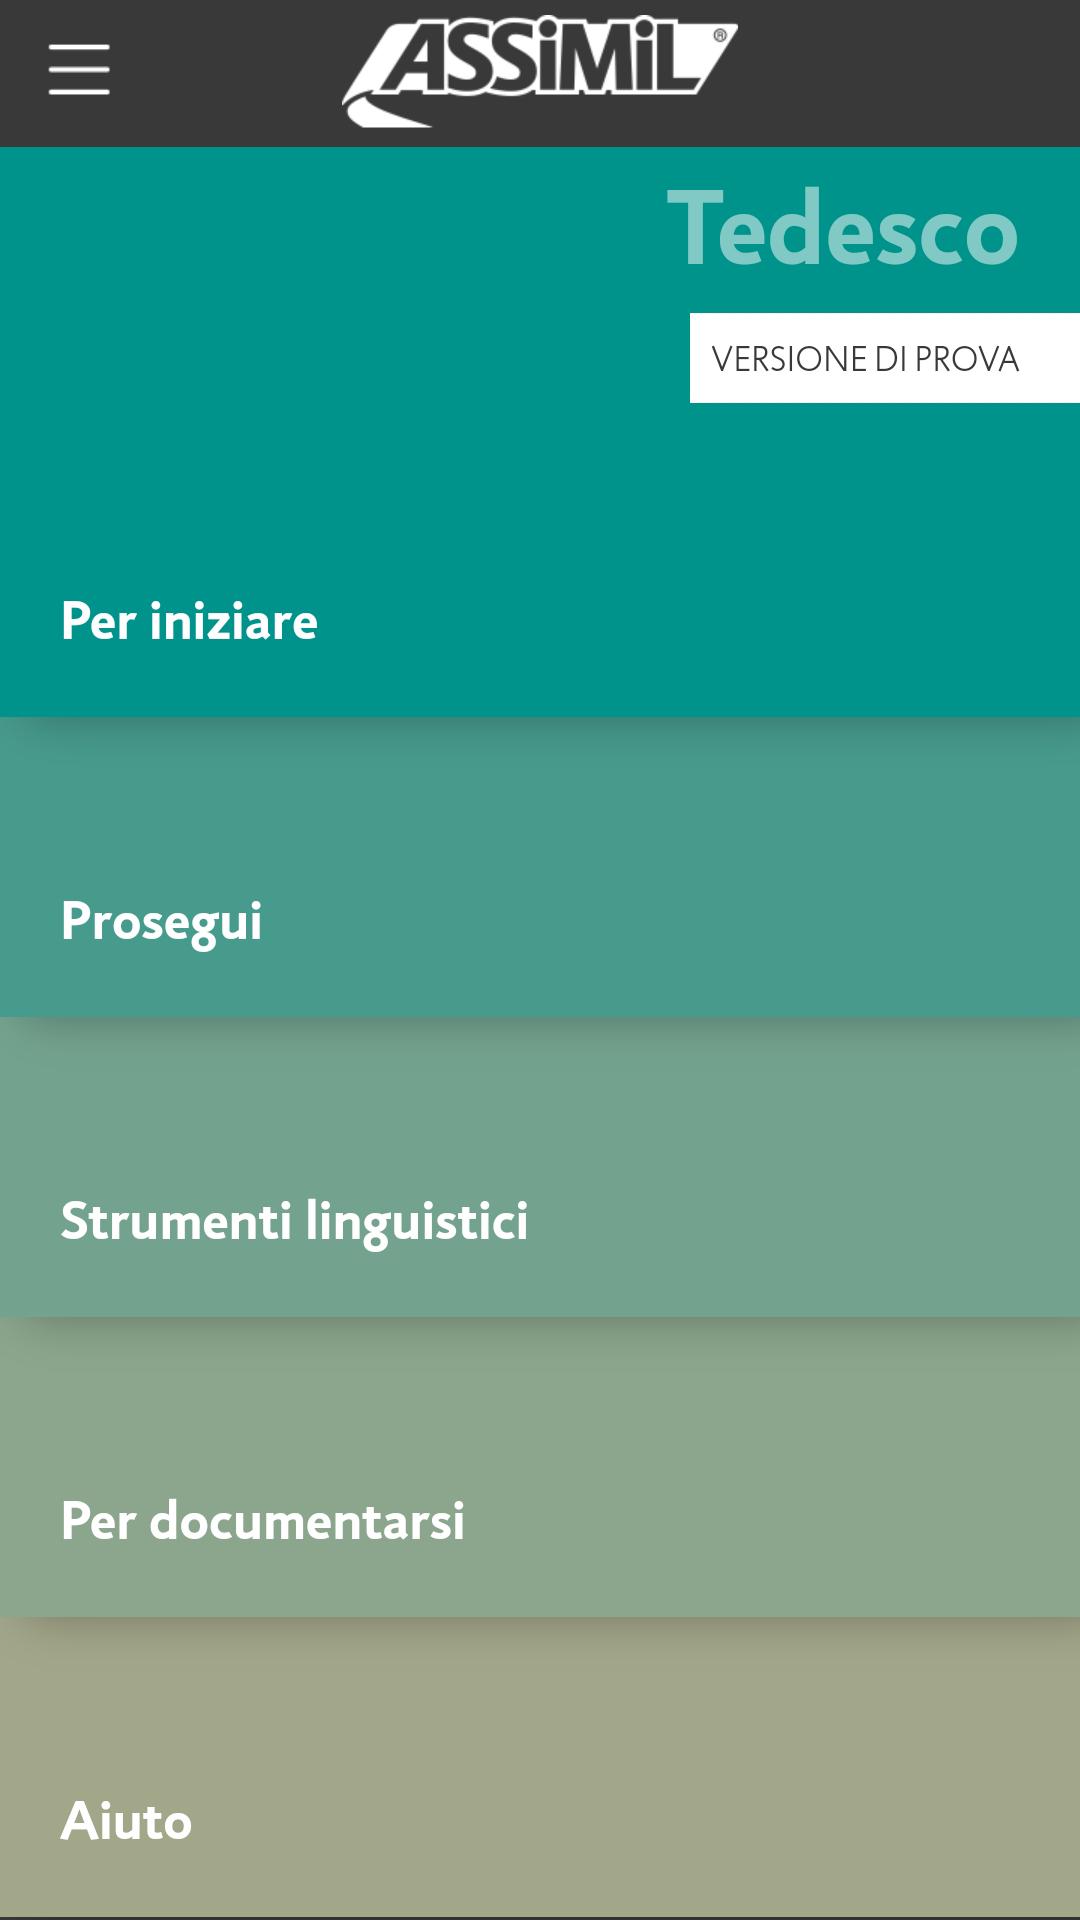 Impara Il Tedesco B2 con Assimil for Android - APK Download